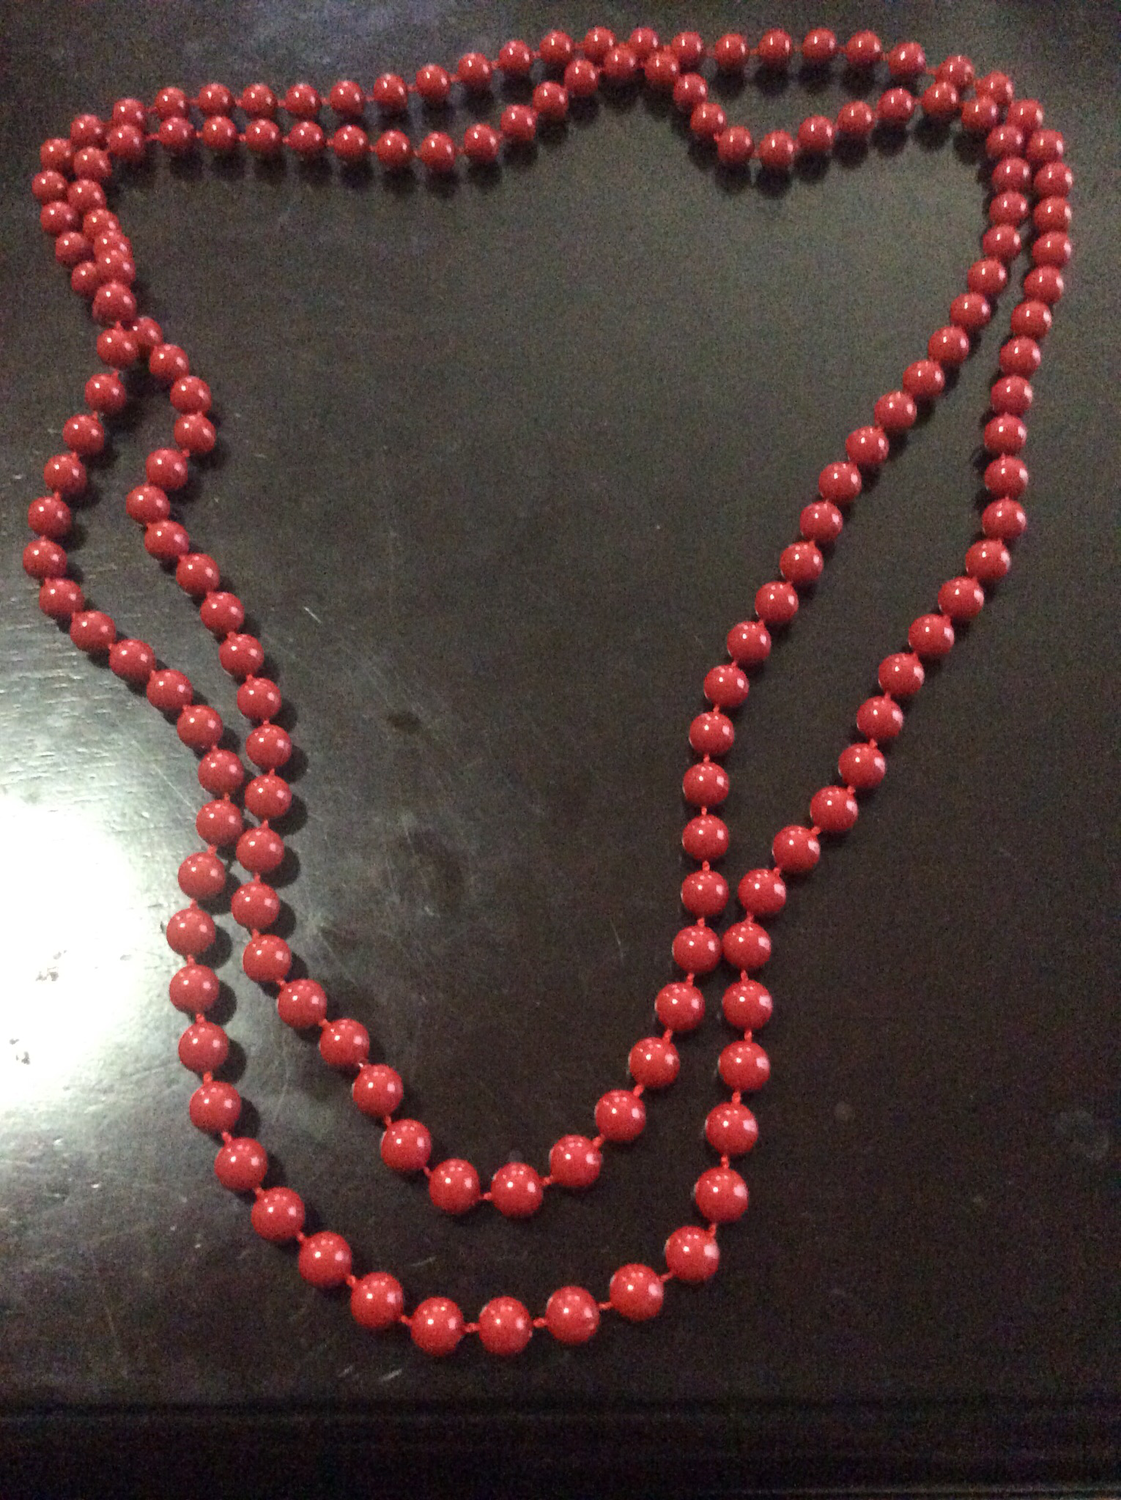 Extremely powerful prayer beads amplify faith, prayers ascend higher, to b ya answered accordingly 